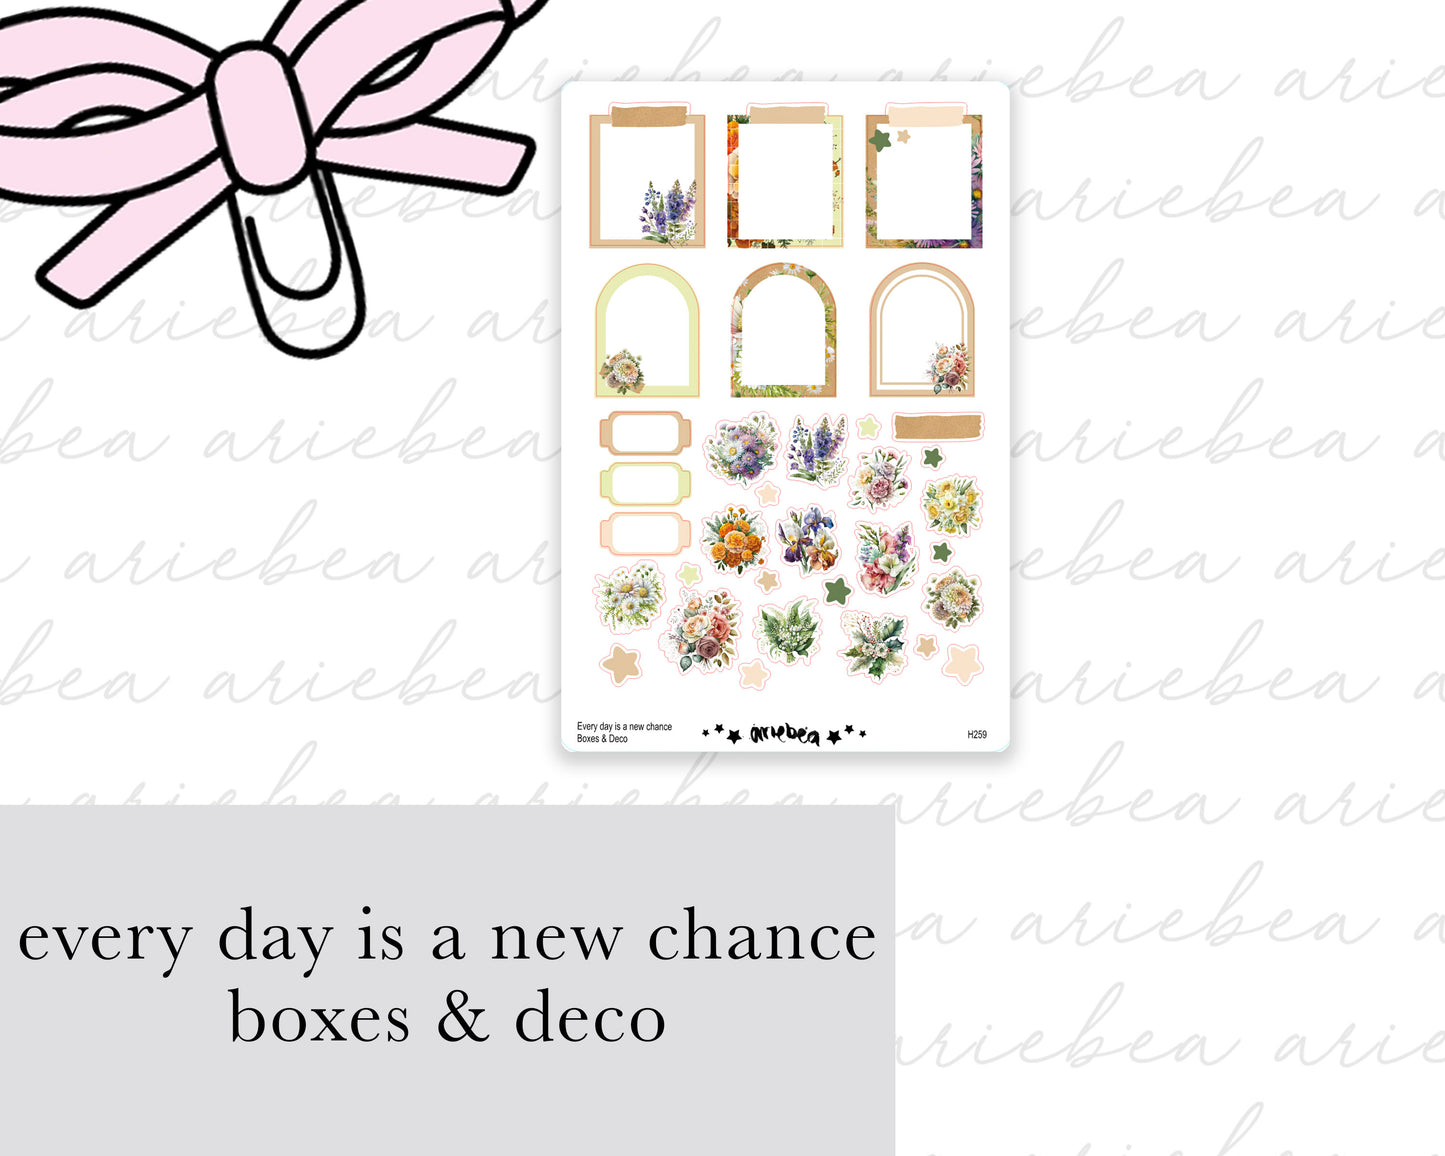 Every day is a new chance Boxes & Deco